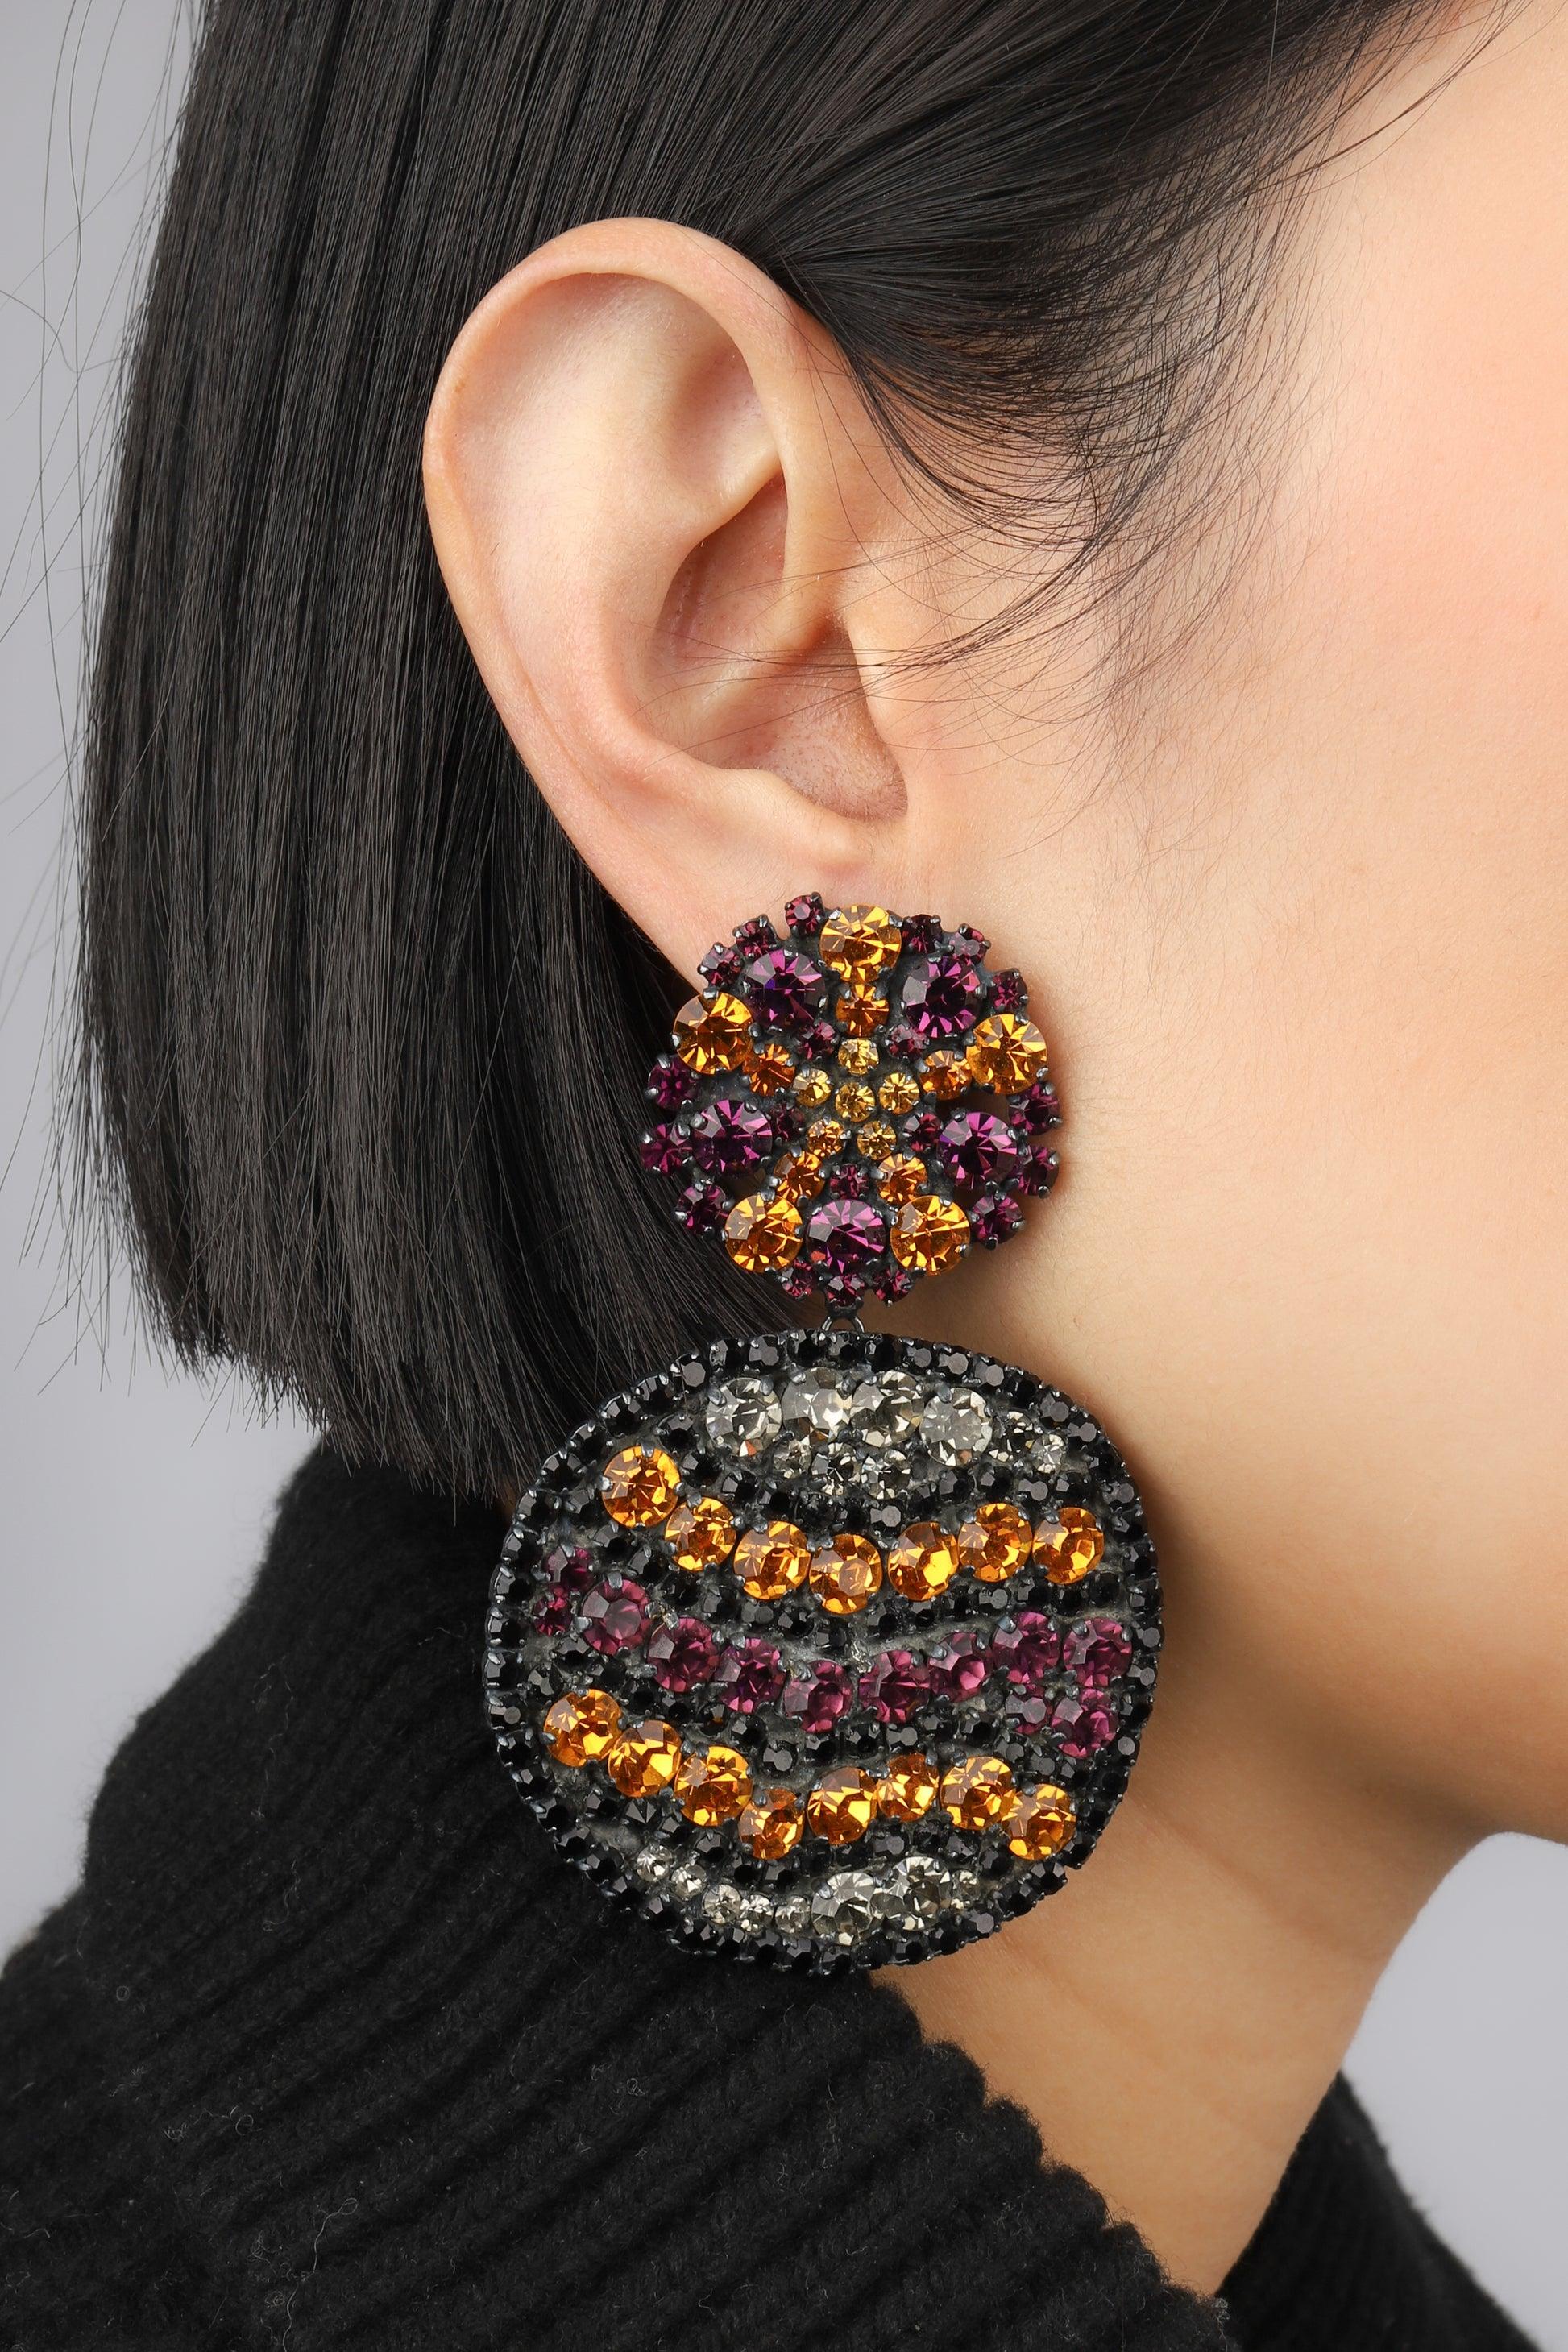 Yves Saint Laurent - (Made in France) Impressive antique dark-silvery metal earrings ornamented with black, orange, crystal, and purple rhinestones.

Additional information:
Condition: Very good condition
Dimensions: Length: 8.5 cm

Seller